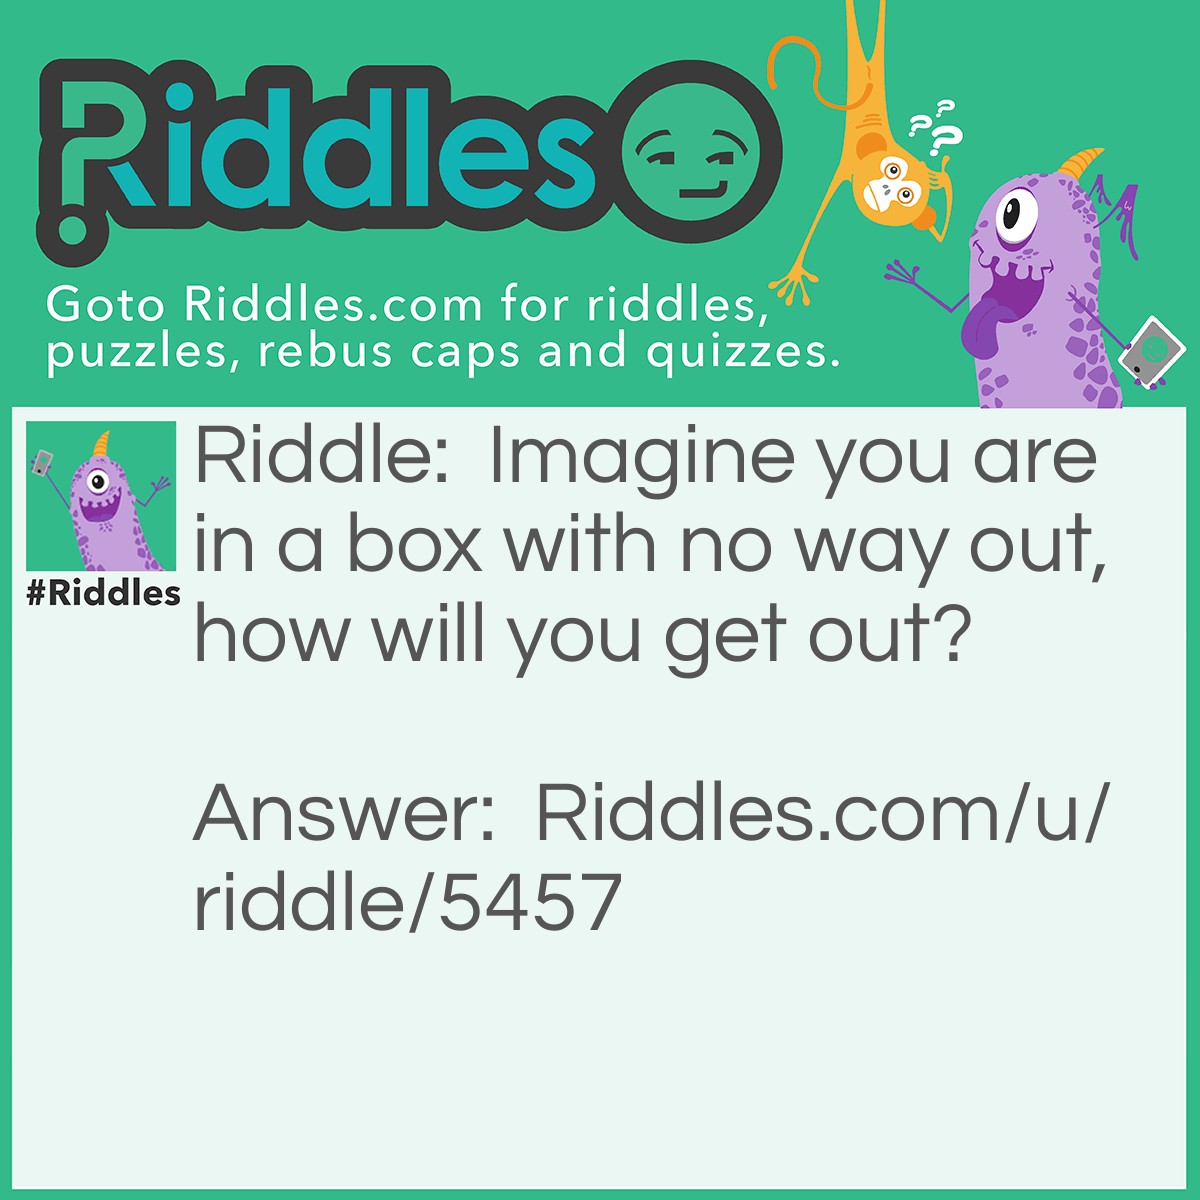 Riddle: Imagine you are in a box with no way out, how will you get out? Answer: Stop imagining.